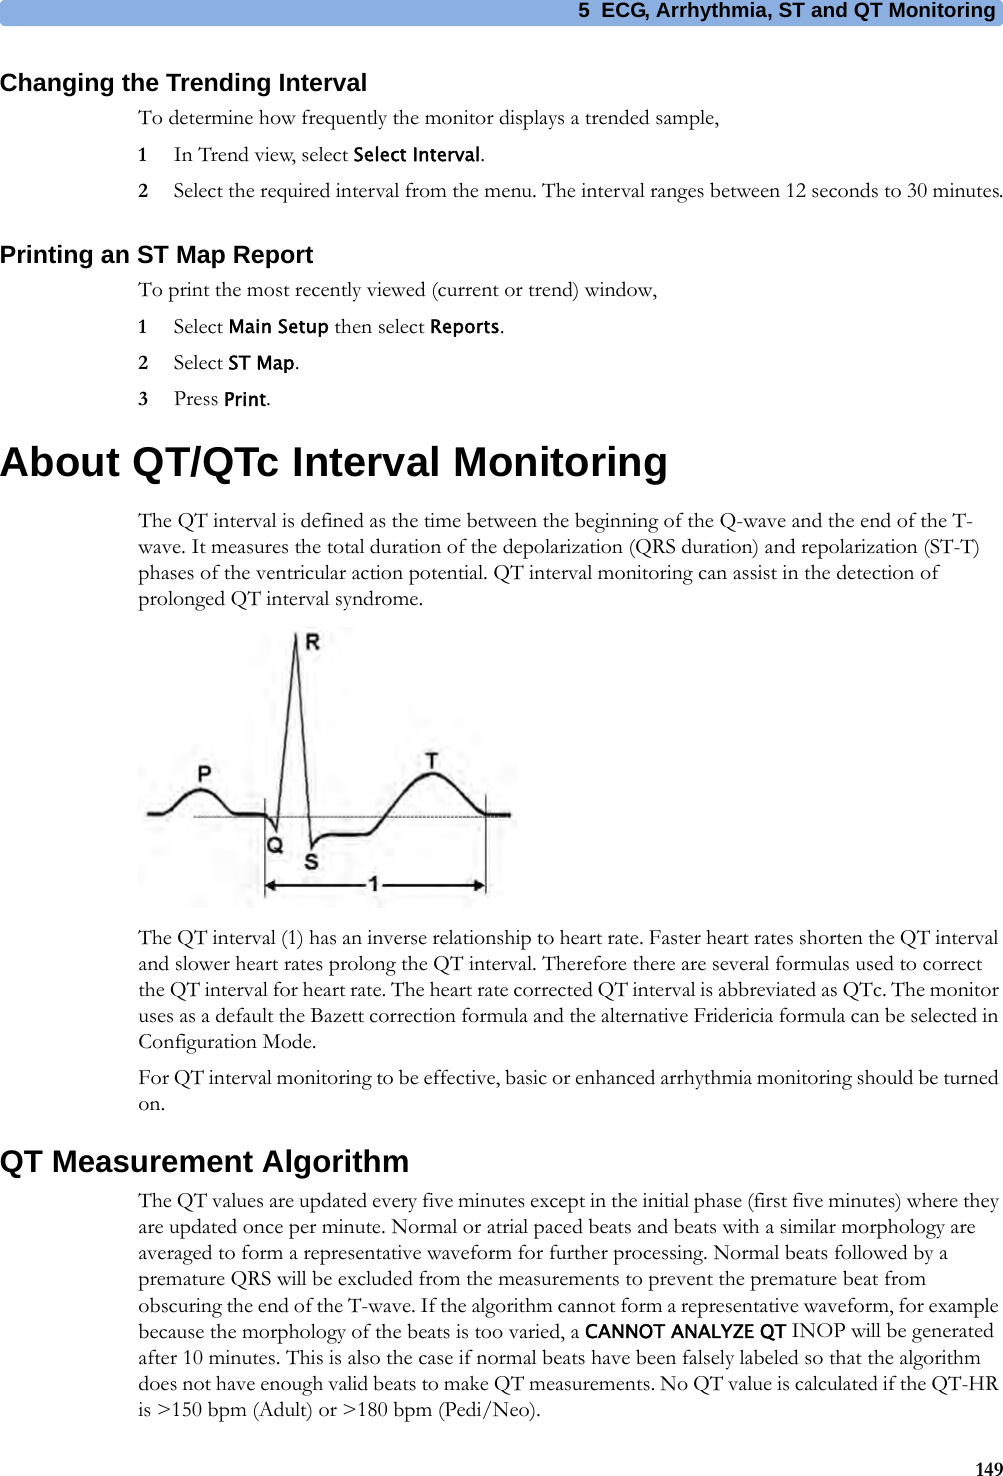 5 ECG, Arrhythmia, ST and QT Monitoring149Changing the Trending IntervalTo determine how frequently the monitor displays a trended sample,1In Trend view, select Select Interval.2Select the required interval from the menu. The interval ranges between 12 seconds to 30 minutes.Printing an ST Map ReportTo print the most recently viewed (current or trend) window,1Select Main Setup then select Reports.2Select ST Map.3Press Print.About QT/QTc Interval MonitoringThe QT interval is defined as the time between the beginning of the Q-wave and the end of the T-wave. It measures the total duration of the depolarization (QRS duration) and repolarization (ST-T) phases of the ventricular action potential. QT interval monitoring can assist in the detection of prolonged QT interval syndrome.The QT interval (1) has an inverse relationship to heart rate. Faster heart rates shorten the QT interval and slower heart rates prolong the QT interval. Therefore there are several formulas used to correct the QT interval for heart rate. The heart rate corrected QT interval is abbreviated as QTc. The monitor uses as a default the Bazett correction formula and the alternative Fridericia formula can be selected in Configuration Mode.For QT interval monitoring to be effective, basic or enhanced arrhythmia monitoring should be turned on.QT Measurement AlgorithmThe QT values are updated every five minutes except in the initial phase (first five minutes) where they are updated once per minute. Normal or atrial paced beats and beats with a similar morphology are averaged to form a representative waveform for further processing. Normal beats followed by a premature QRS will be excluded from the measurements to prevent the premature beat from obscuring the end of the T-wave. If the algorithm cannot form a representative waveform, for example because the morphology of the beats is too varied, a CANNOT ANALYZE QT INOP will be generated after 10 minutes. This is also the case if normal beats have been falsely labeled so that the algorithm does not have enough valid beats to make QT measurements. No QT value is calculated if the QT-HR is &gt;150 bpm (Adult) or &gt;180 bpm (Pedi/Neo).